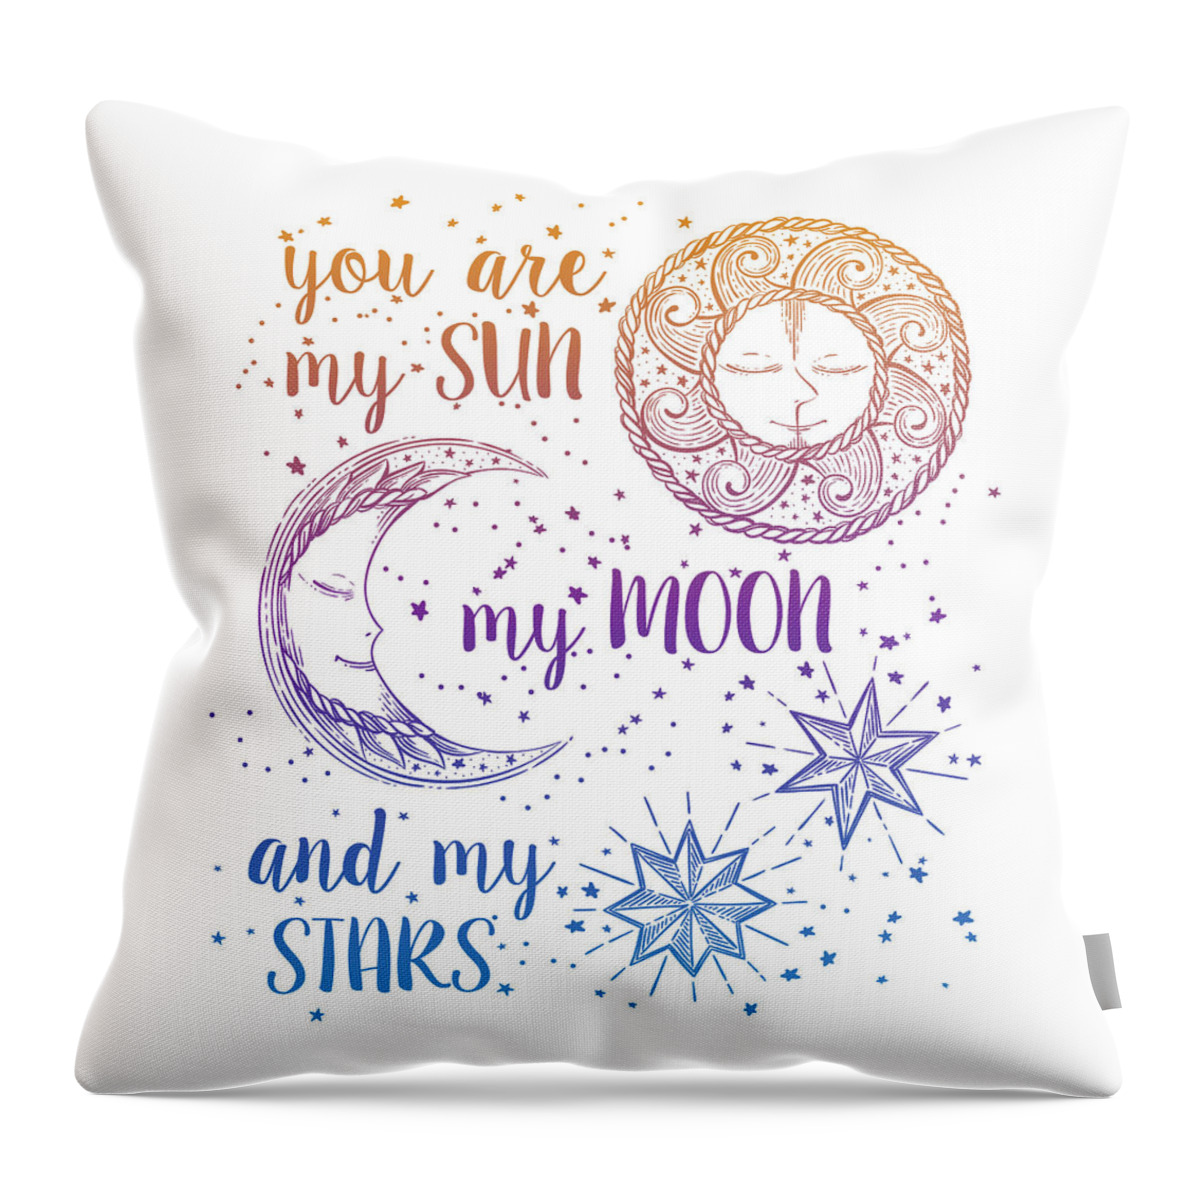  Throw Pillow featuring the painting You Are My Sun Moon And Stars by Little Bunny Sunshine